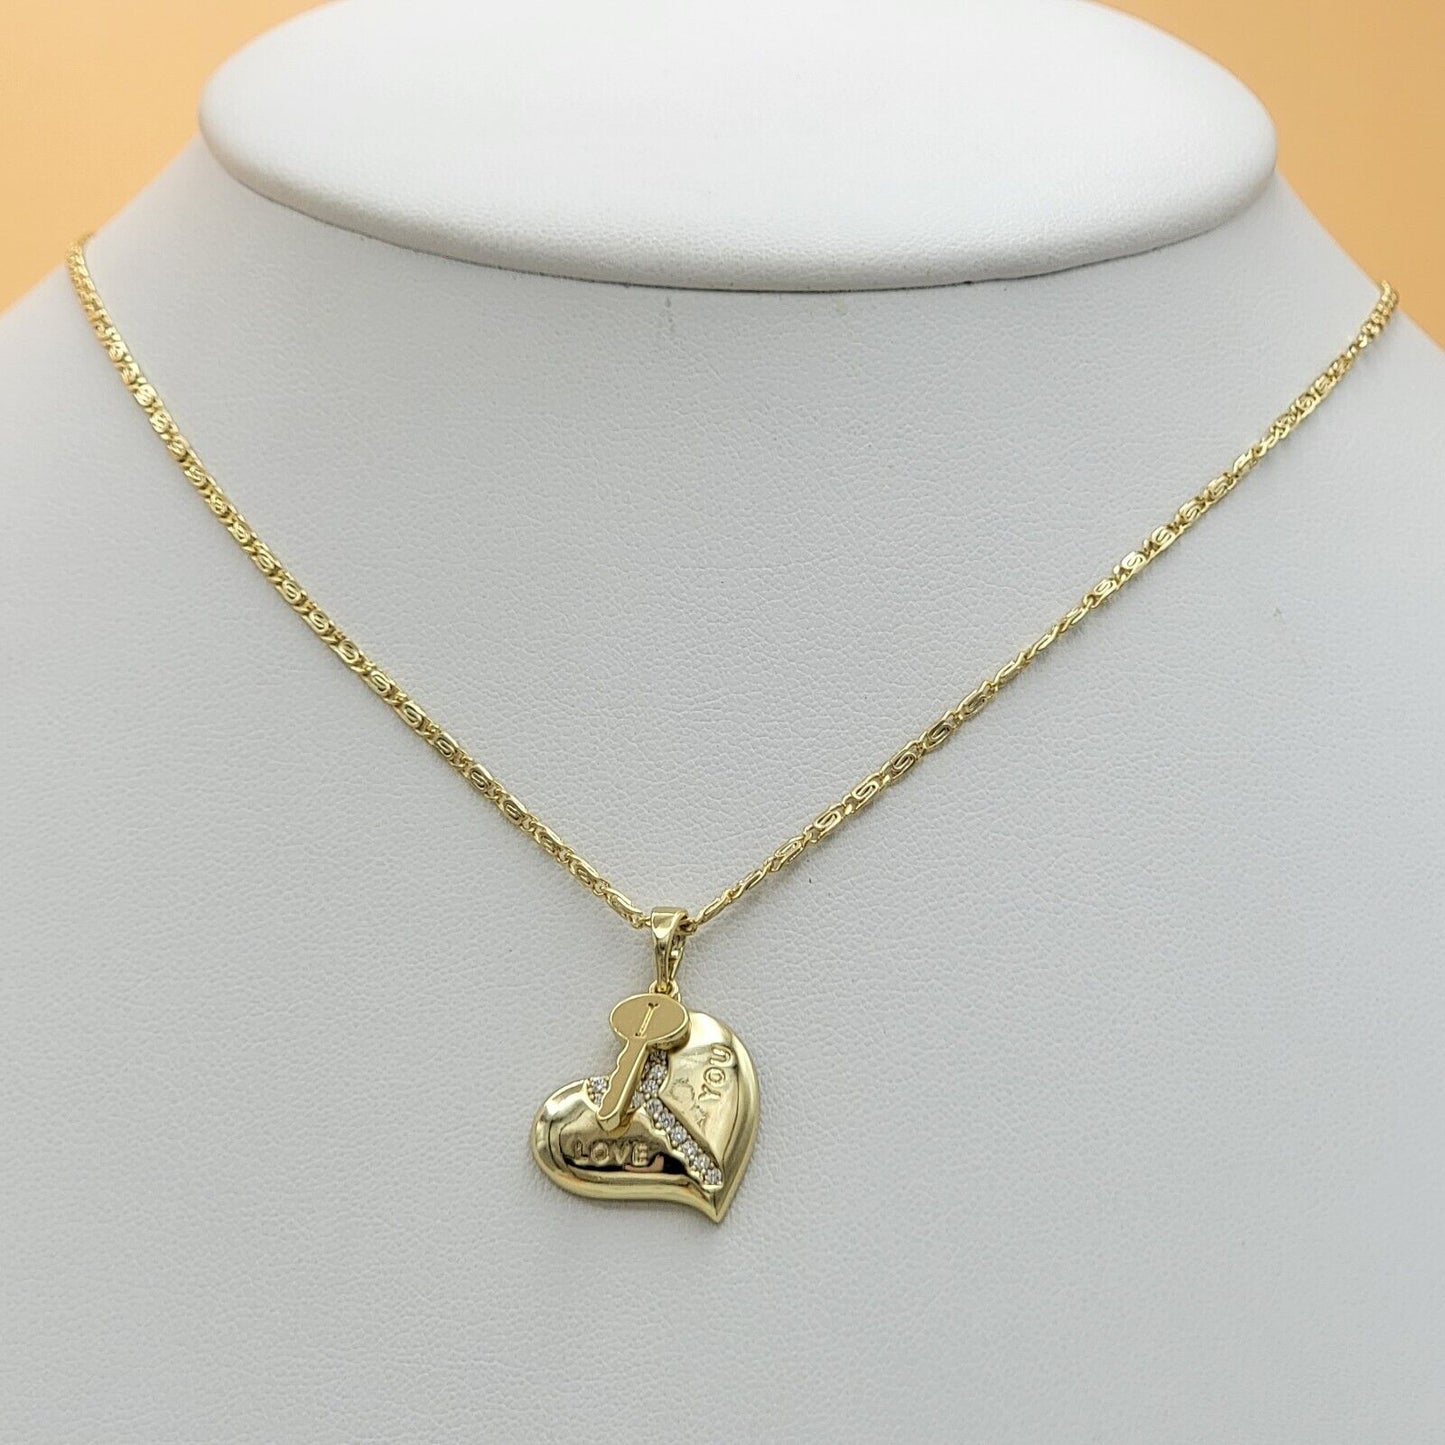 Necklaces - 14K Gold Plated. Crystal Key HEART Love You Pendant & Chain.